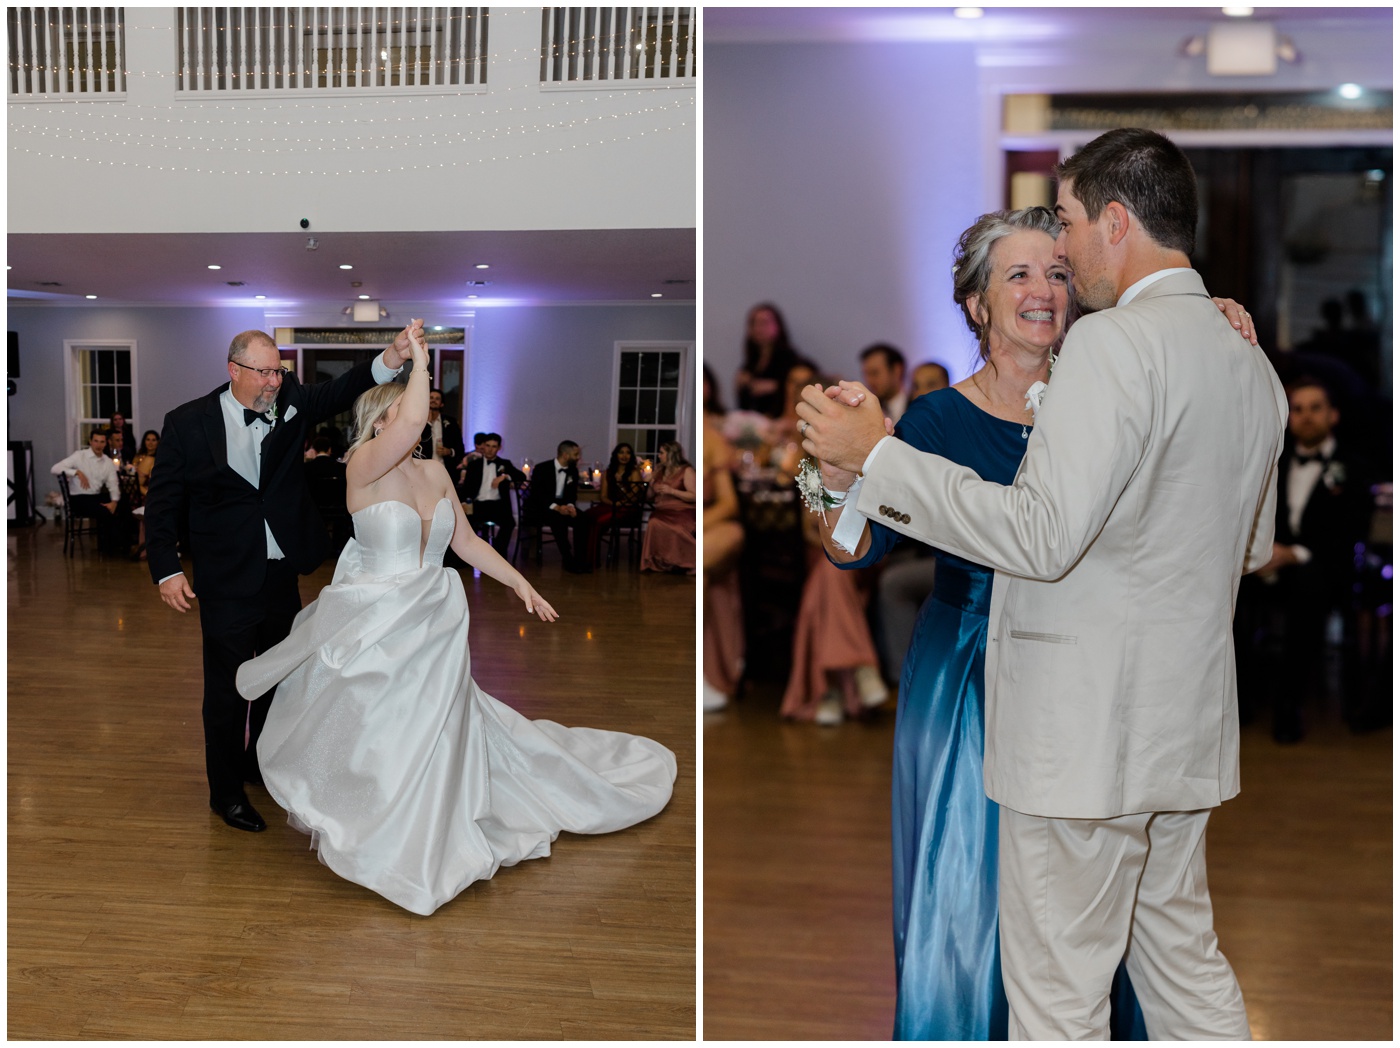 First dances take place with the mother of the groom and father of the bride. 